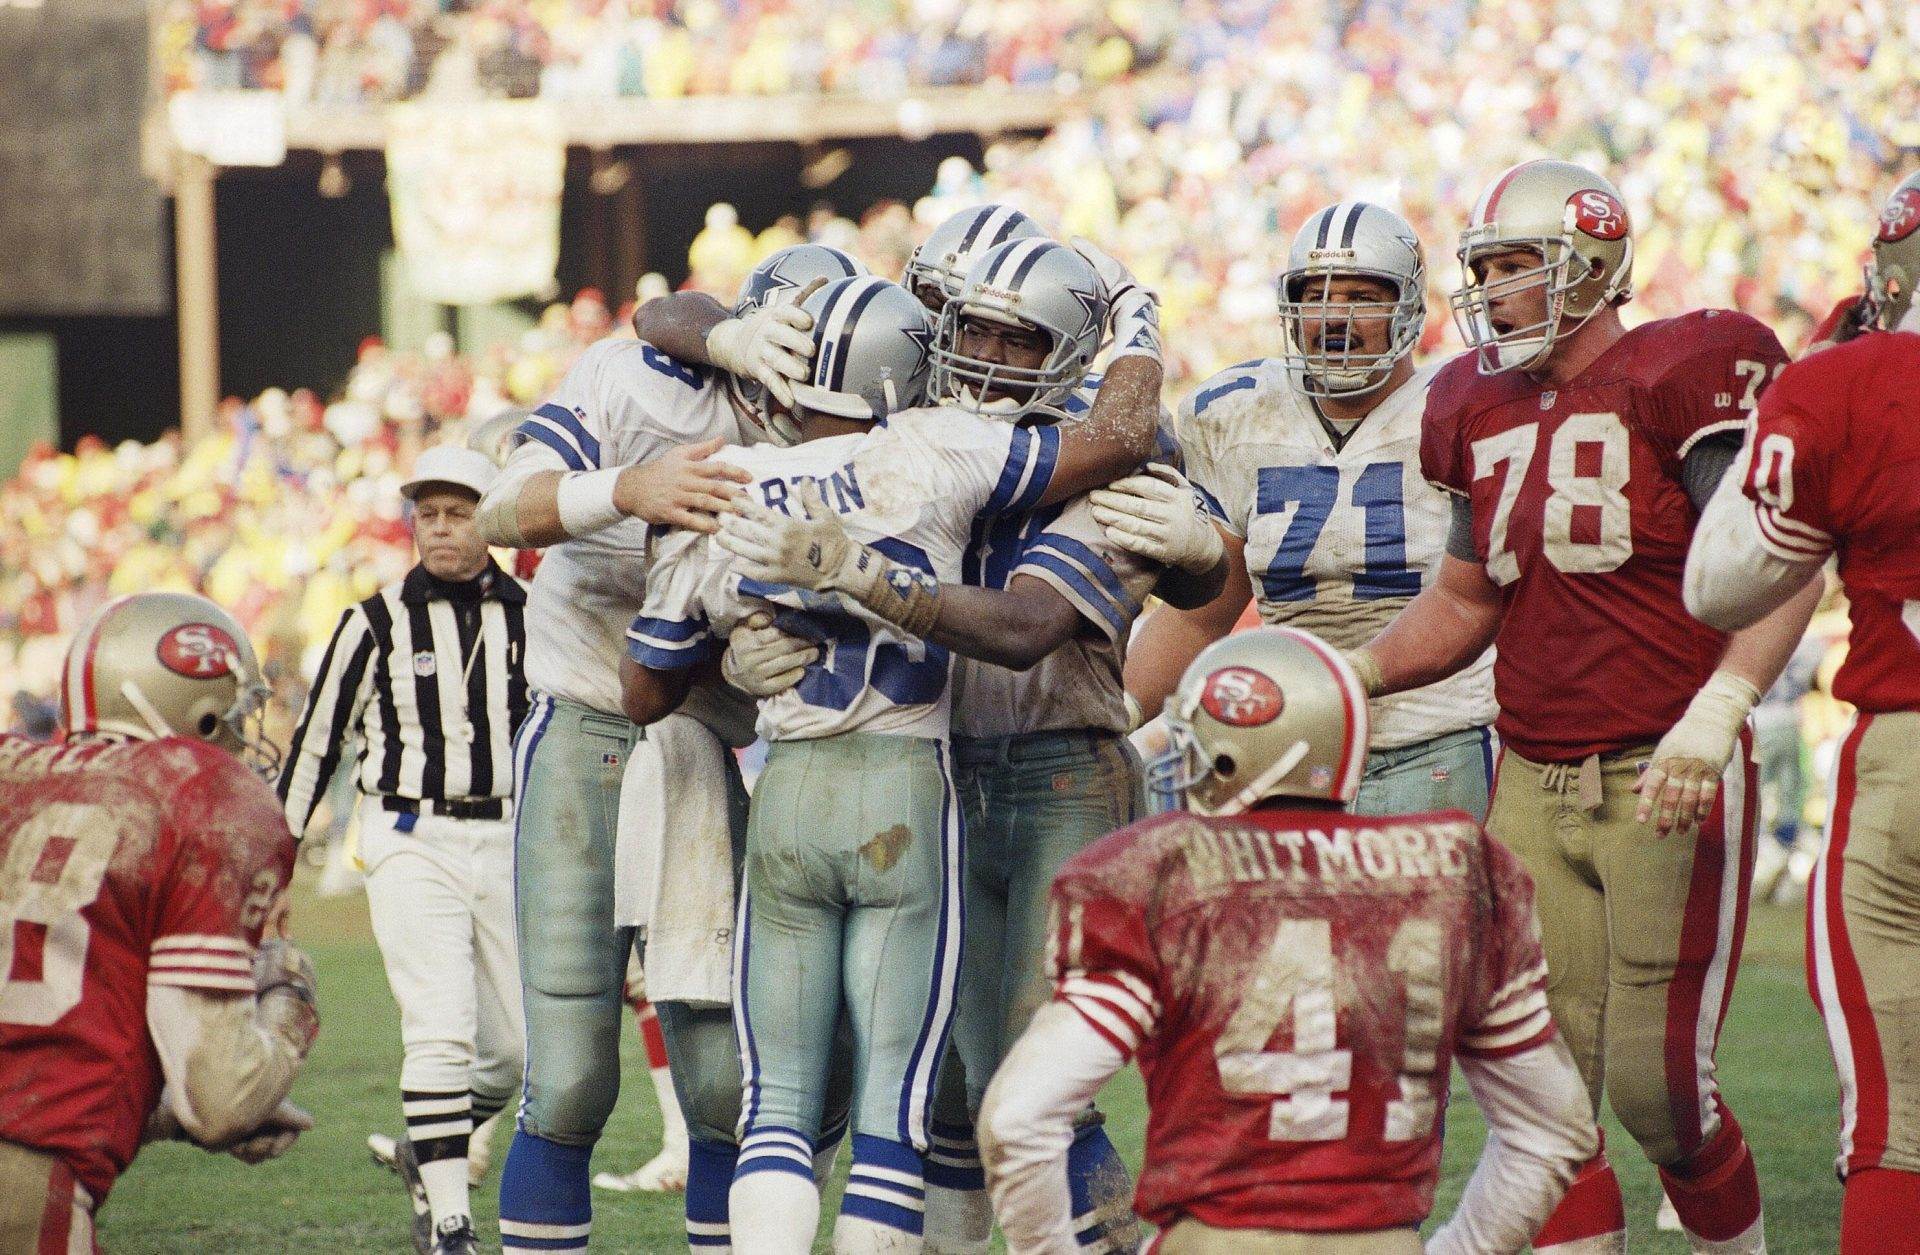 Cowboys at 49ers: The history of their playoff matchups